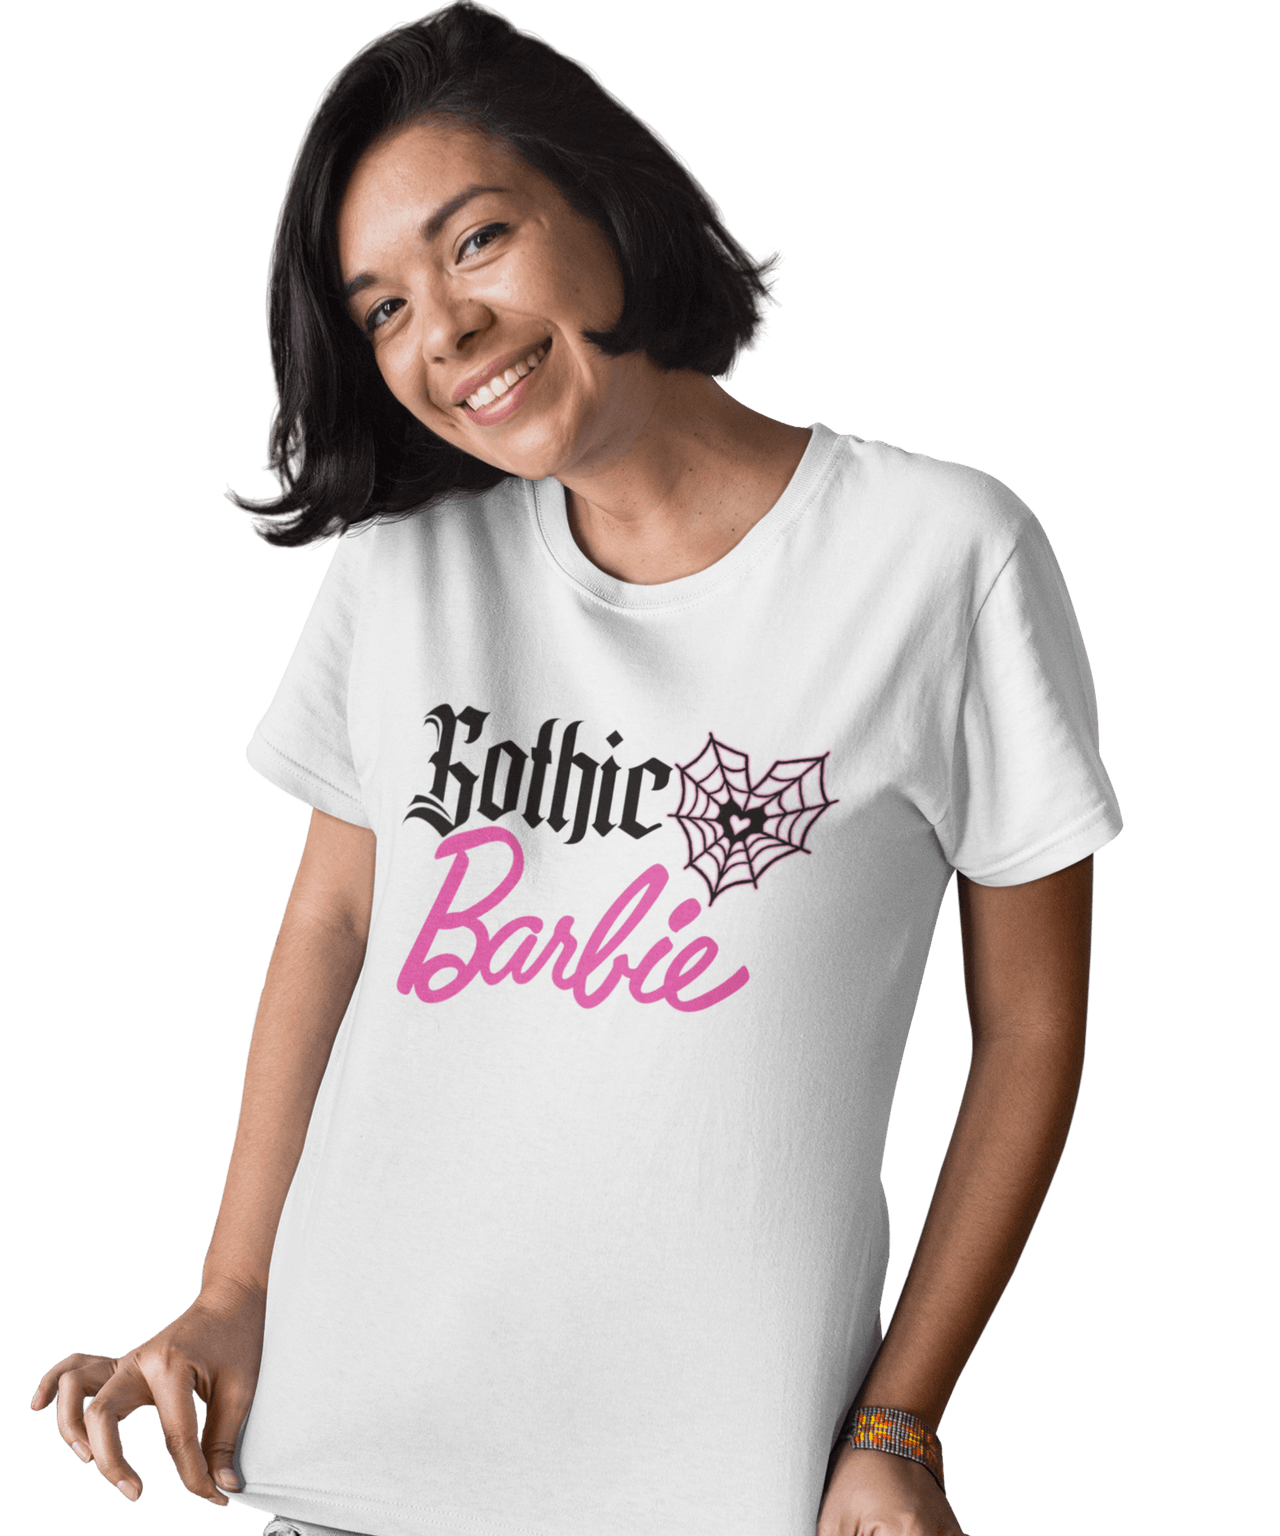 Gothic Barbie Adult Unisex Oversize Grey or White Unisex T-Shirt For Men And Women 8Ball